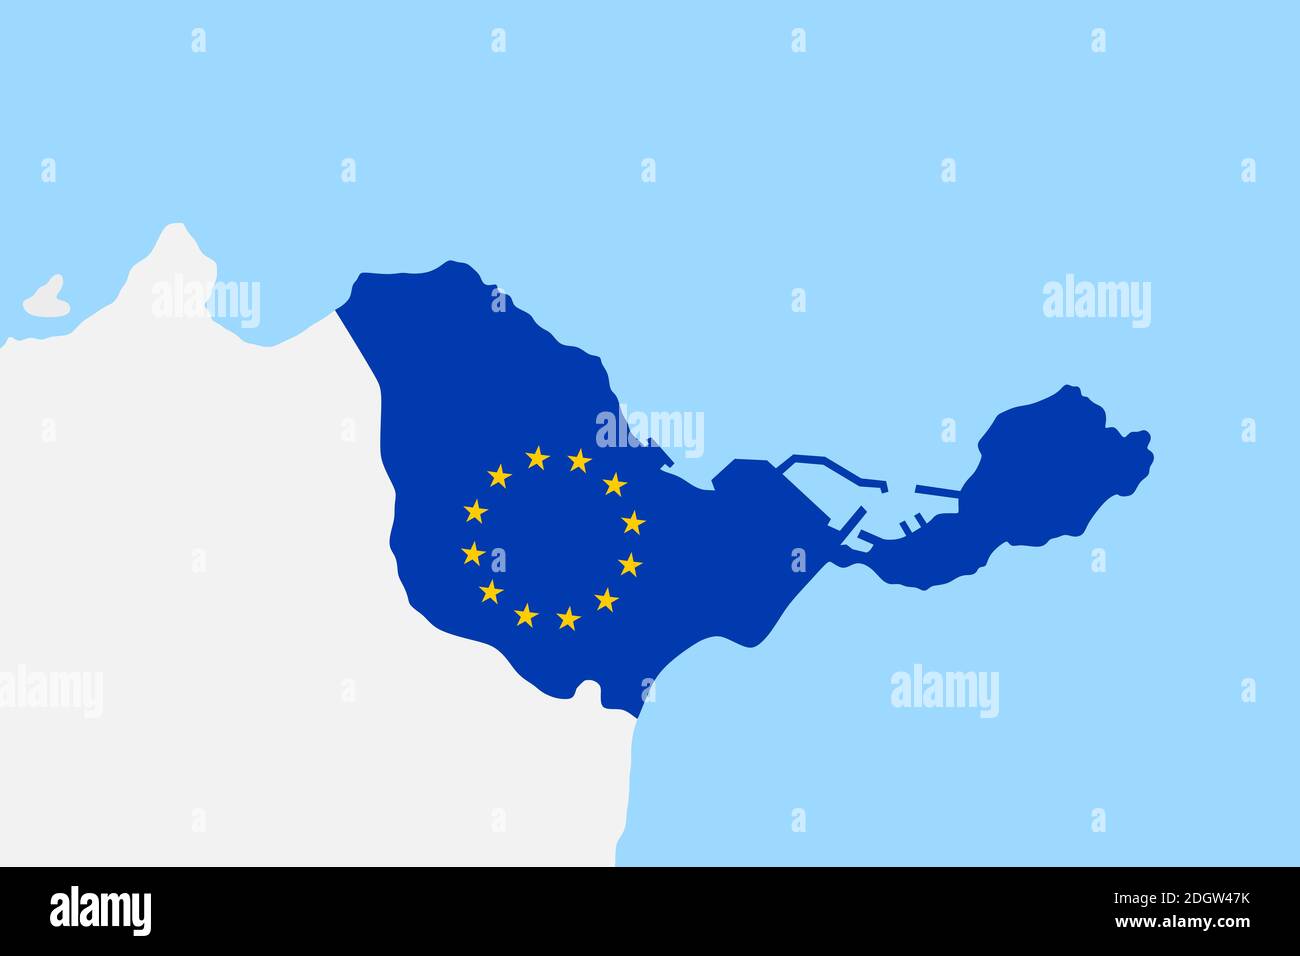 Territory of Ceuta, Spain. Zone of European union on the African continent. Spanish area is surrounded by Morocco and Africa. Vector illustration Stock Photo